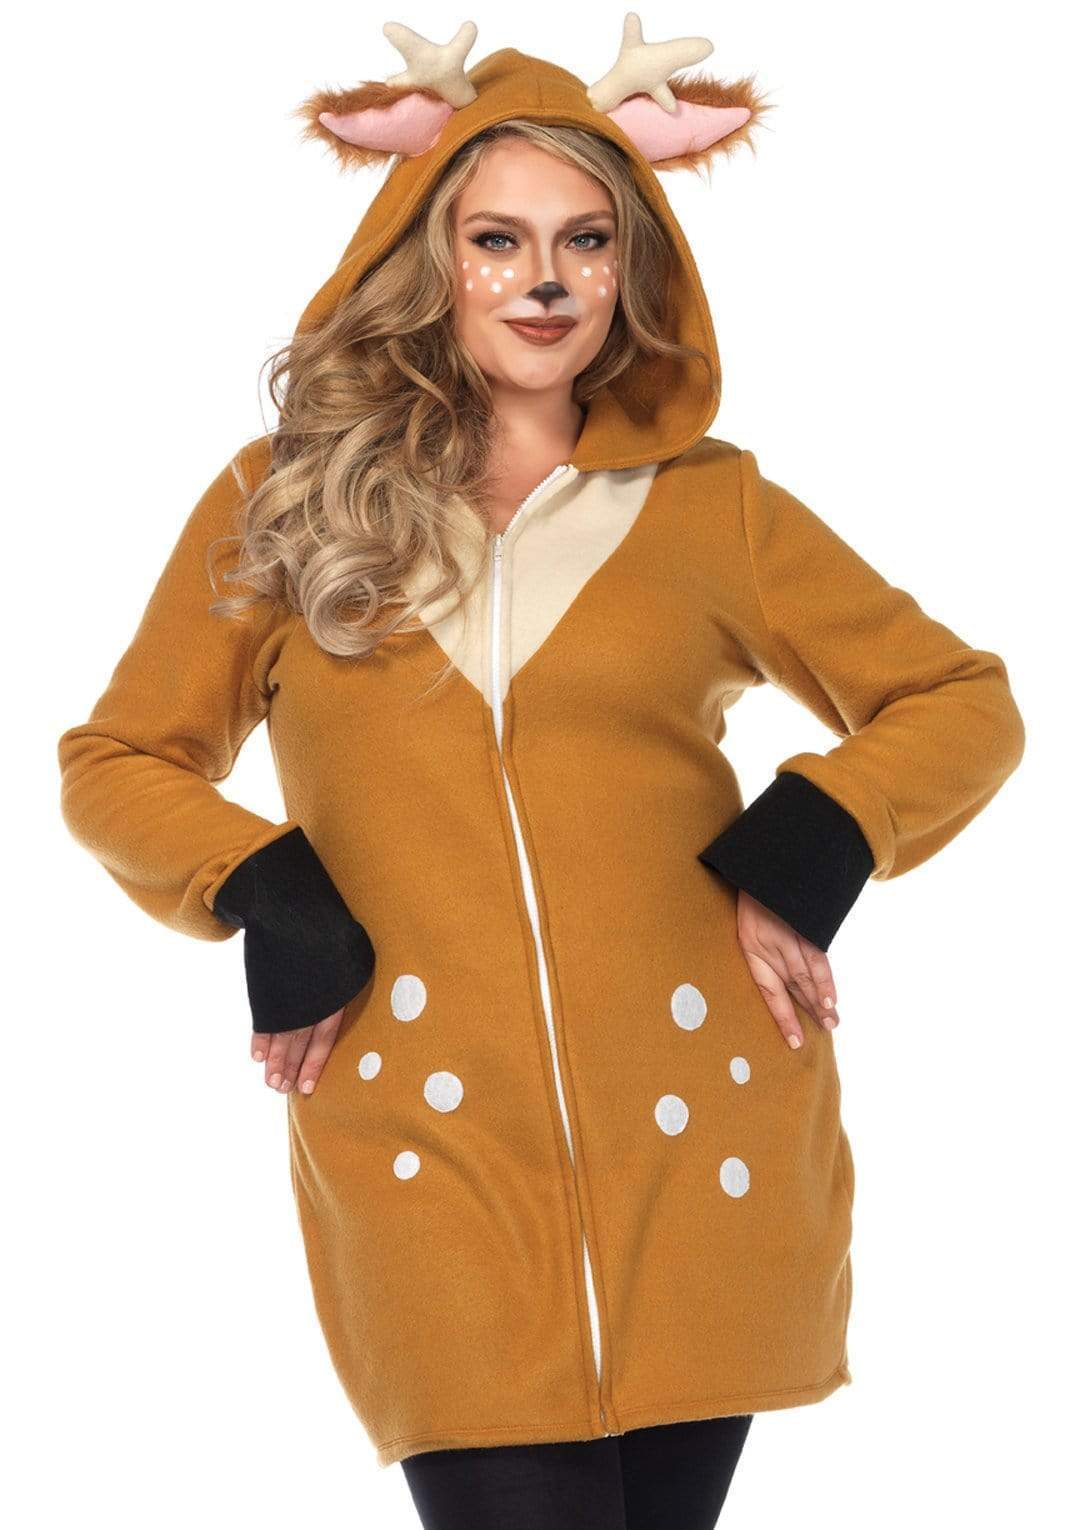 Fawn fleece Zipper Front Dress with Ear hood and Fawn Tail